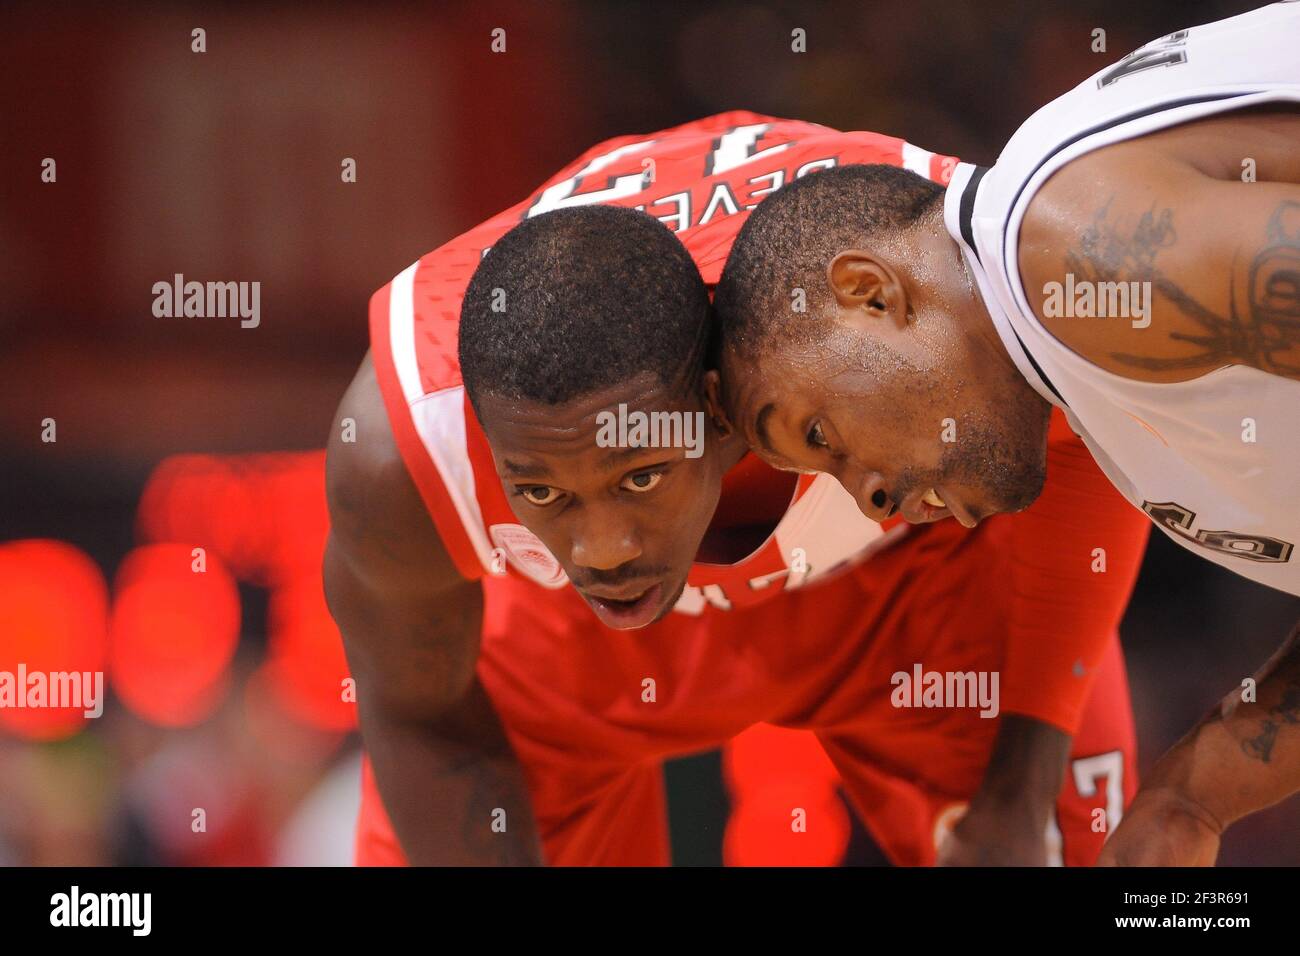 Page 9 - Euroleague Final Four High Resolution Stock Photography and Images  - Alamy